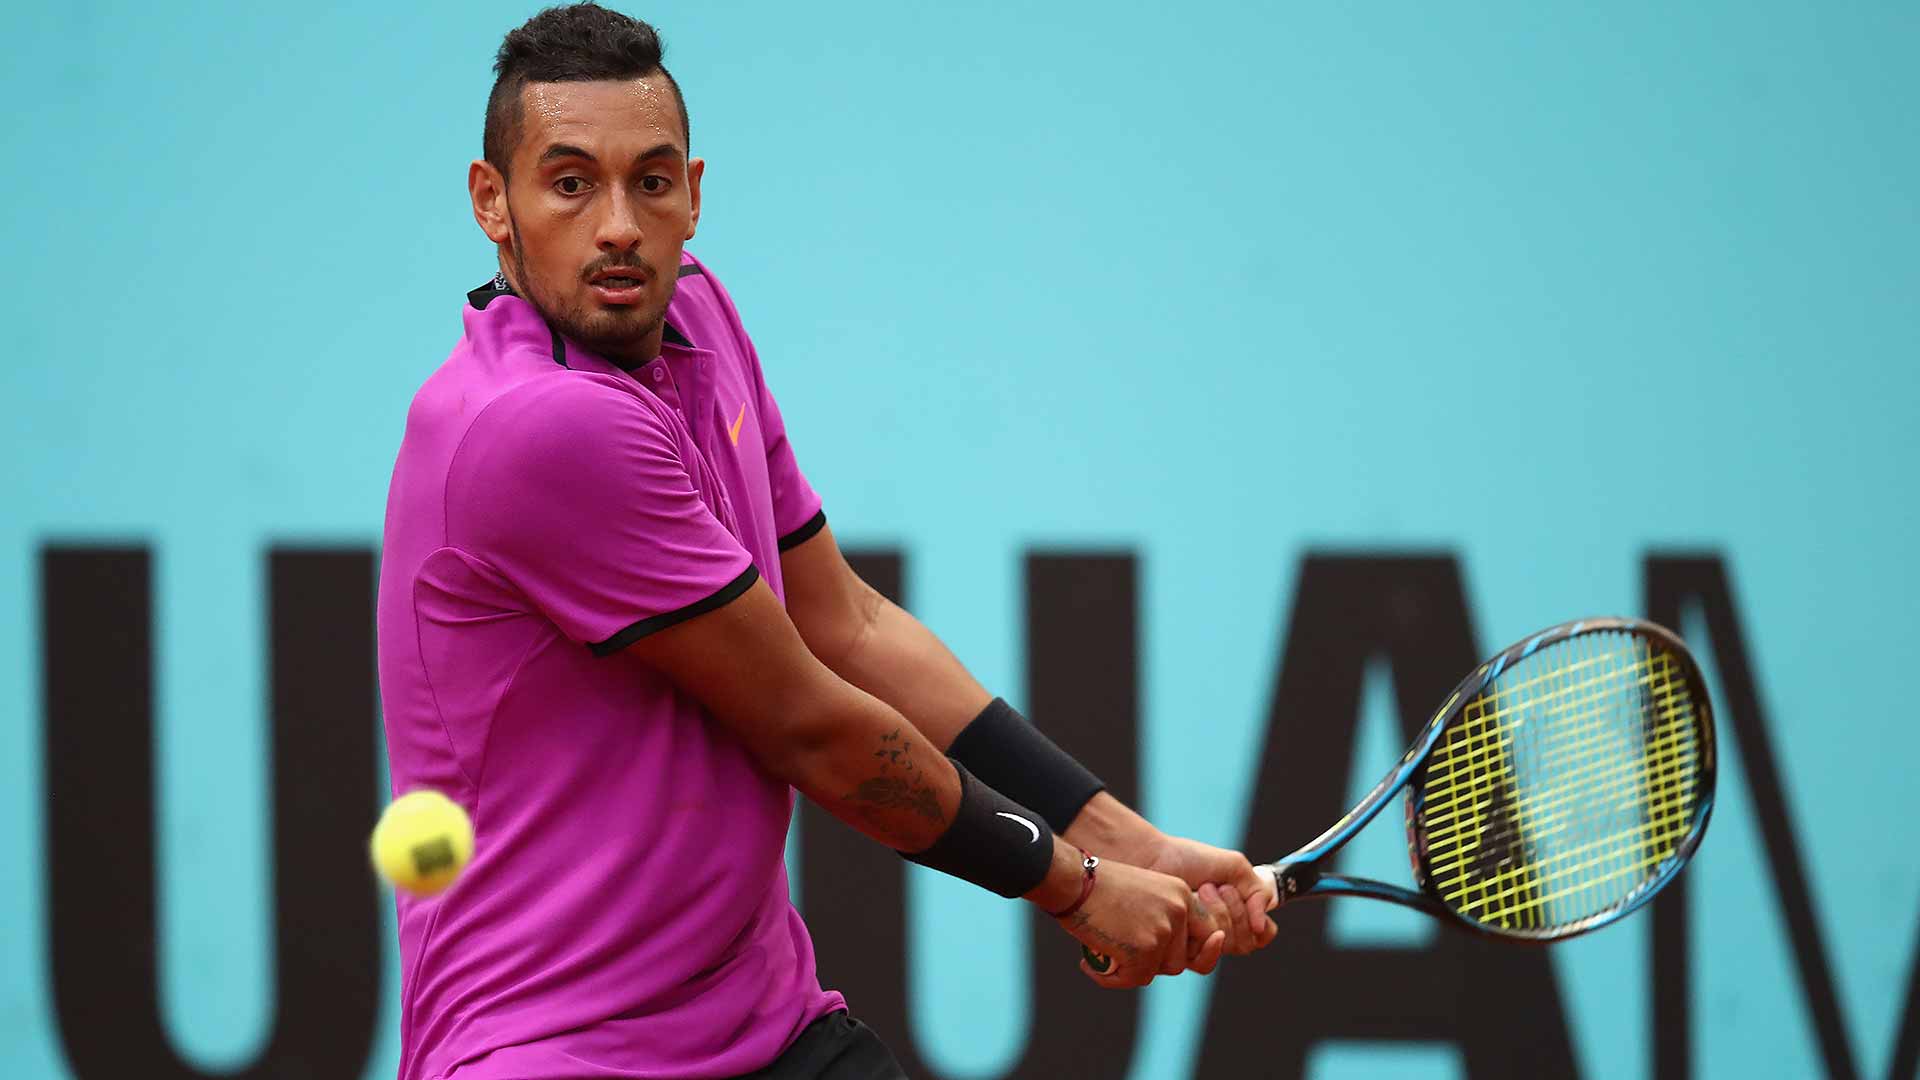 best wallpaper image about Nick Kyrgios tennis player